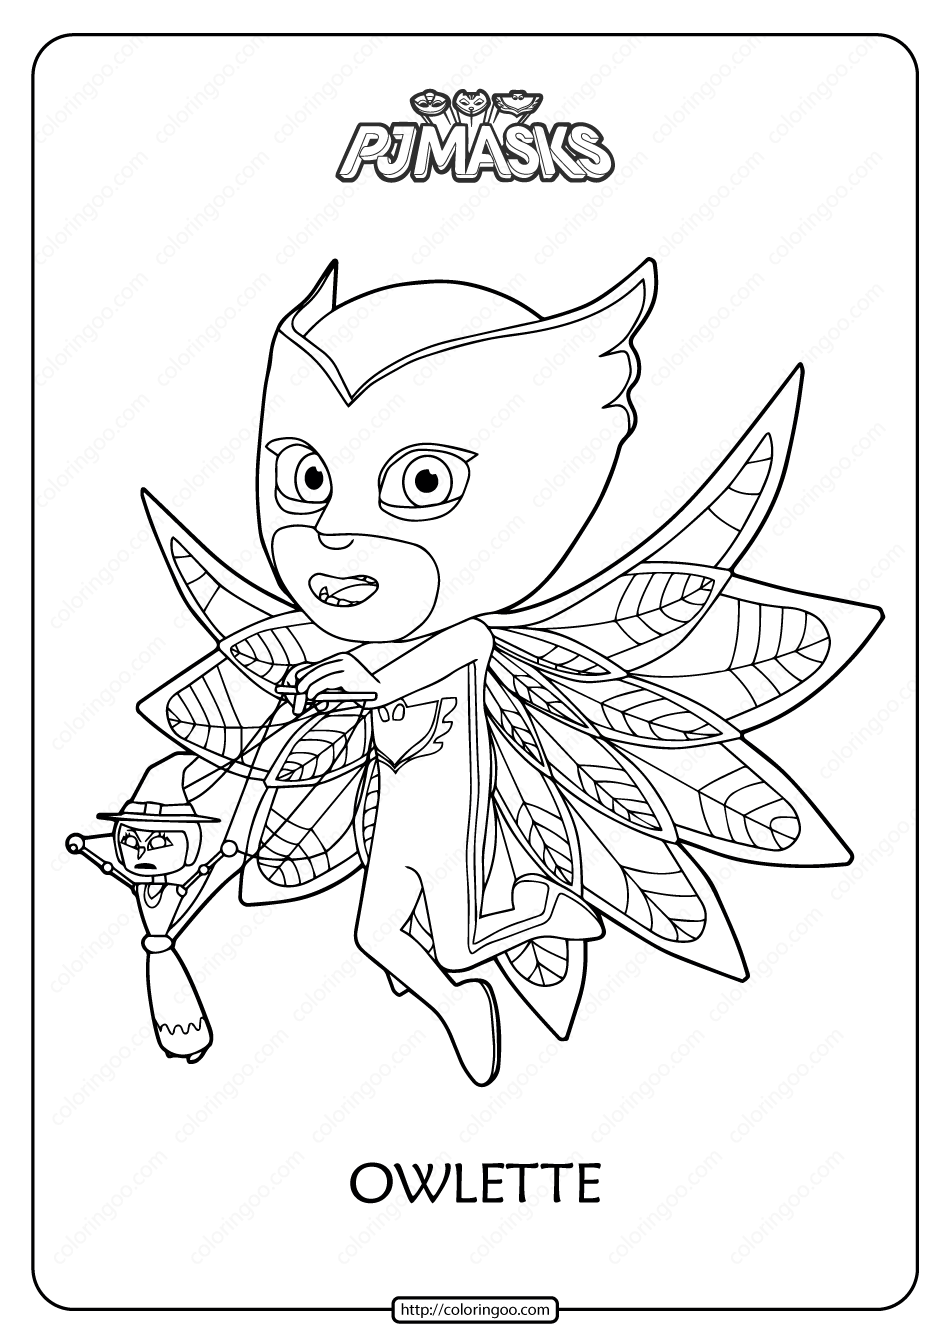 free printable pj masks owlette coloring pages